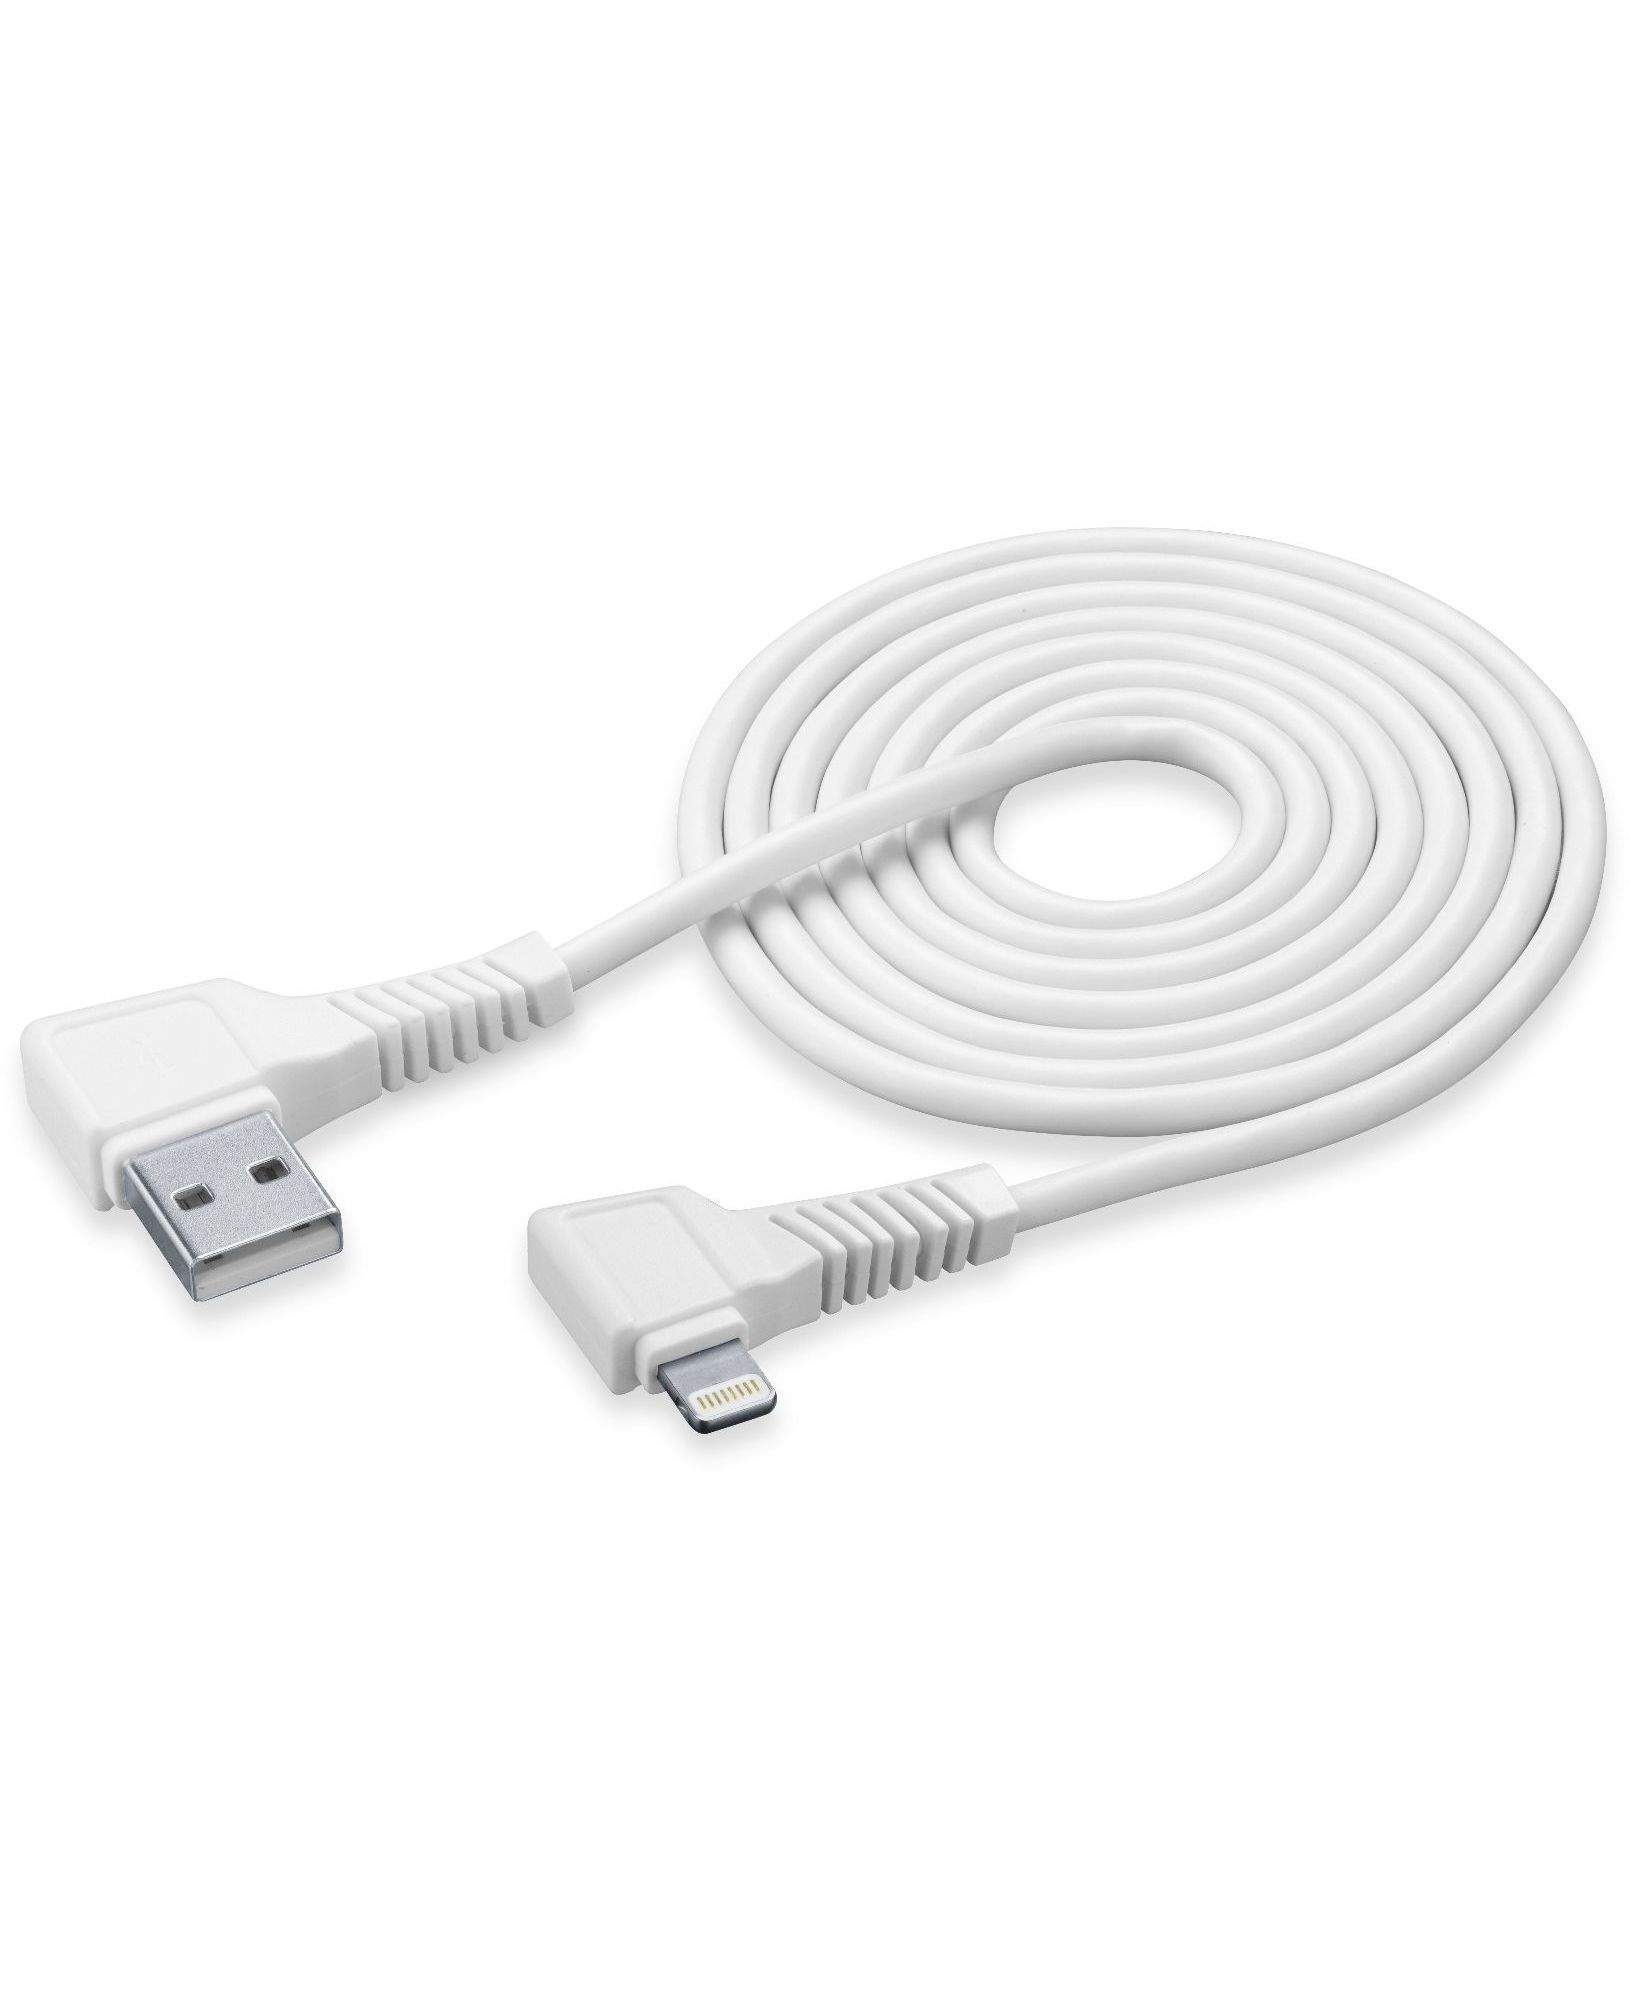 Usb cable, Apple lightning square connector 2m, white